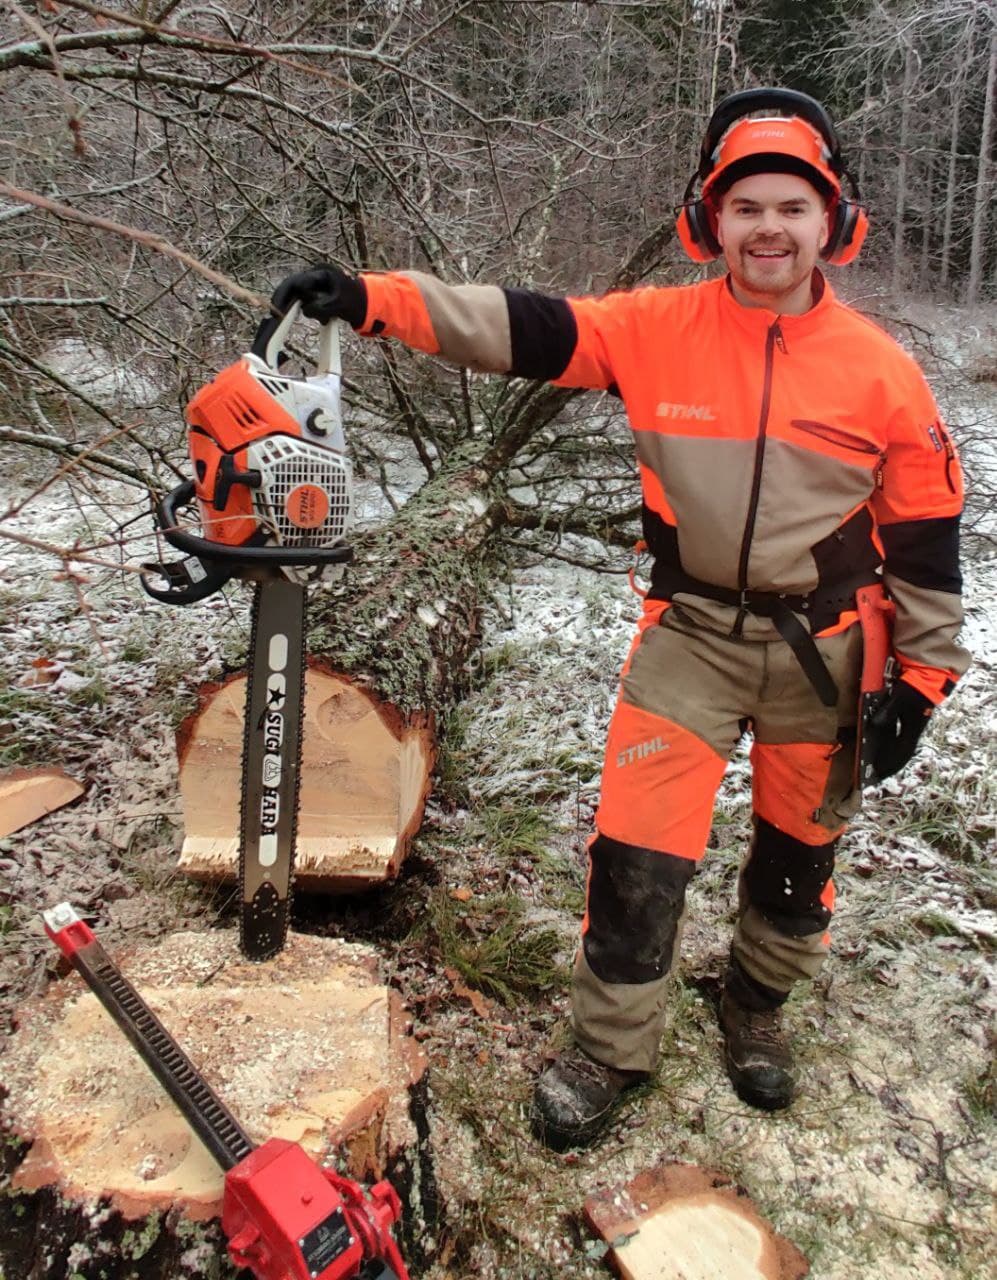 Me posing and leaning to my chainsaw after felling a large tree